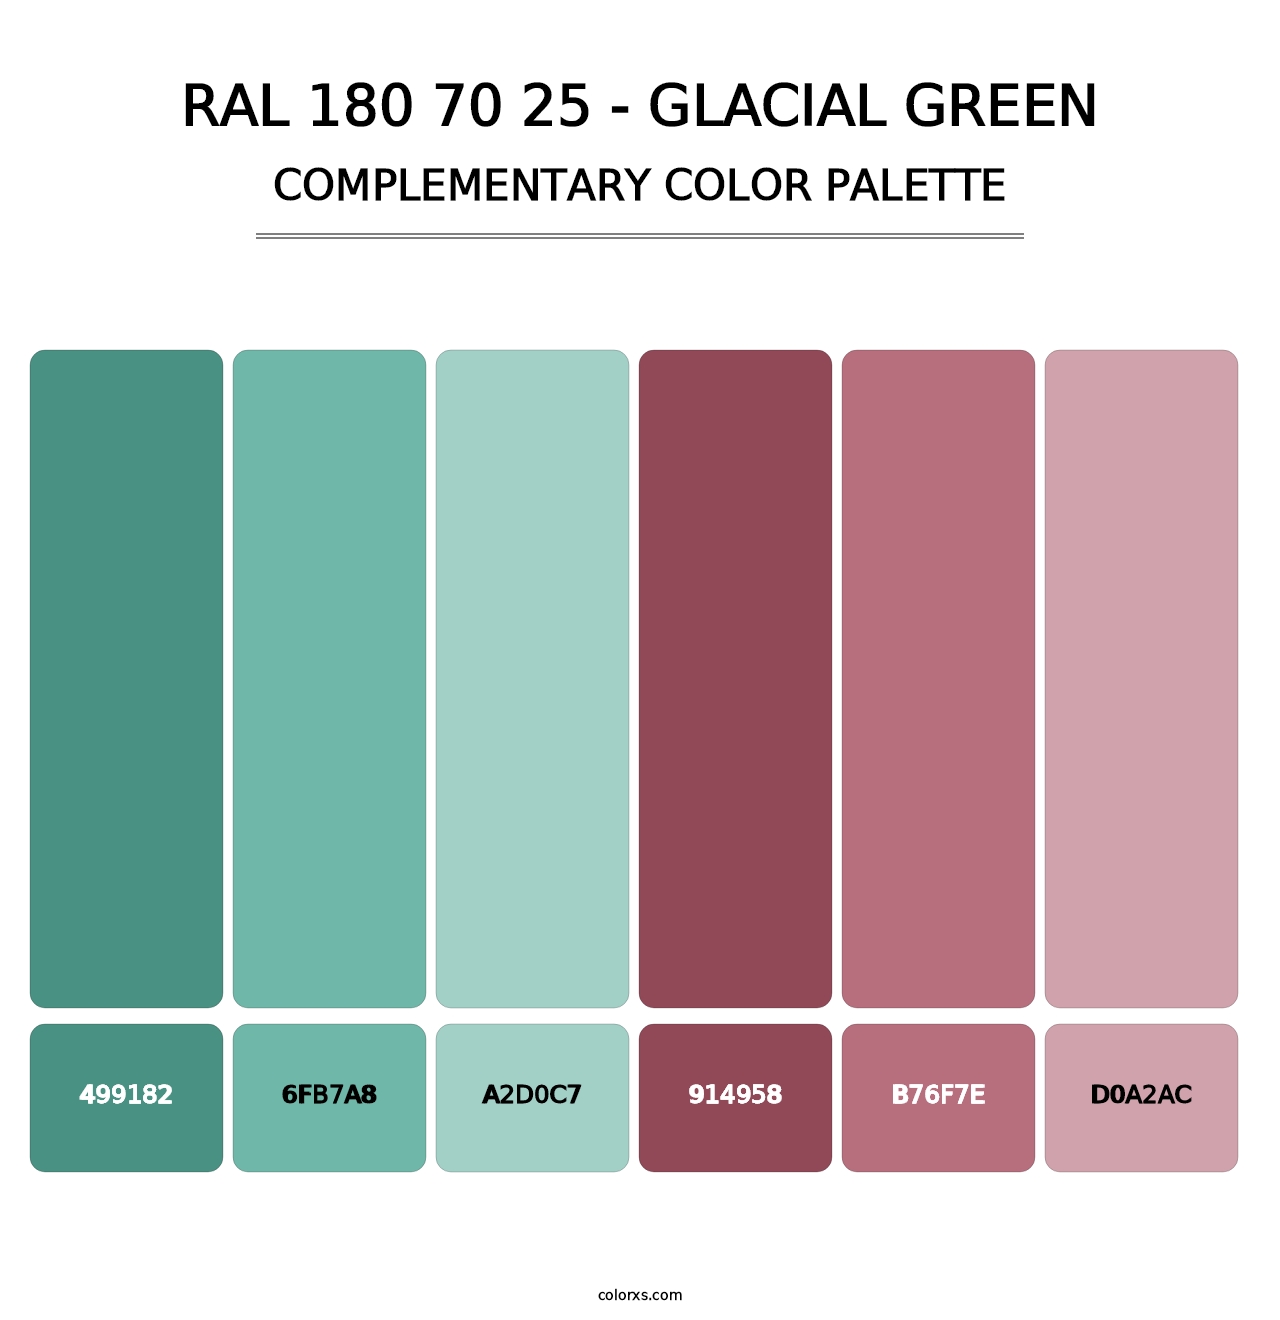 RAL 180 70 25 - Glacial Green - Complementary Color Palette